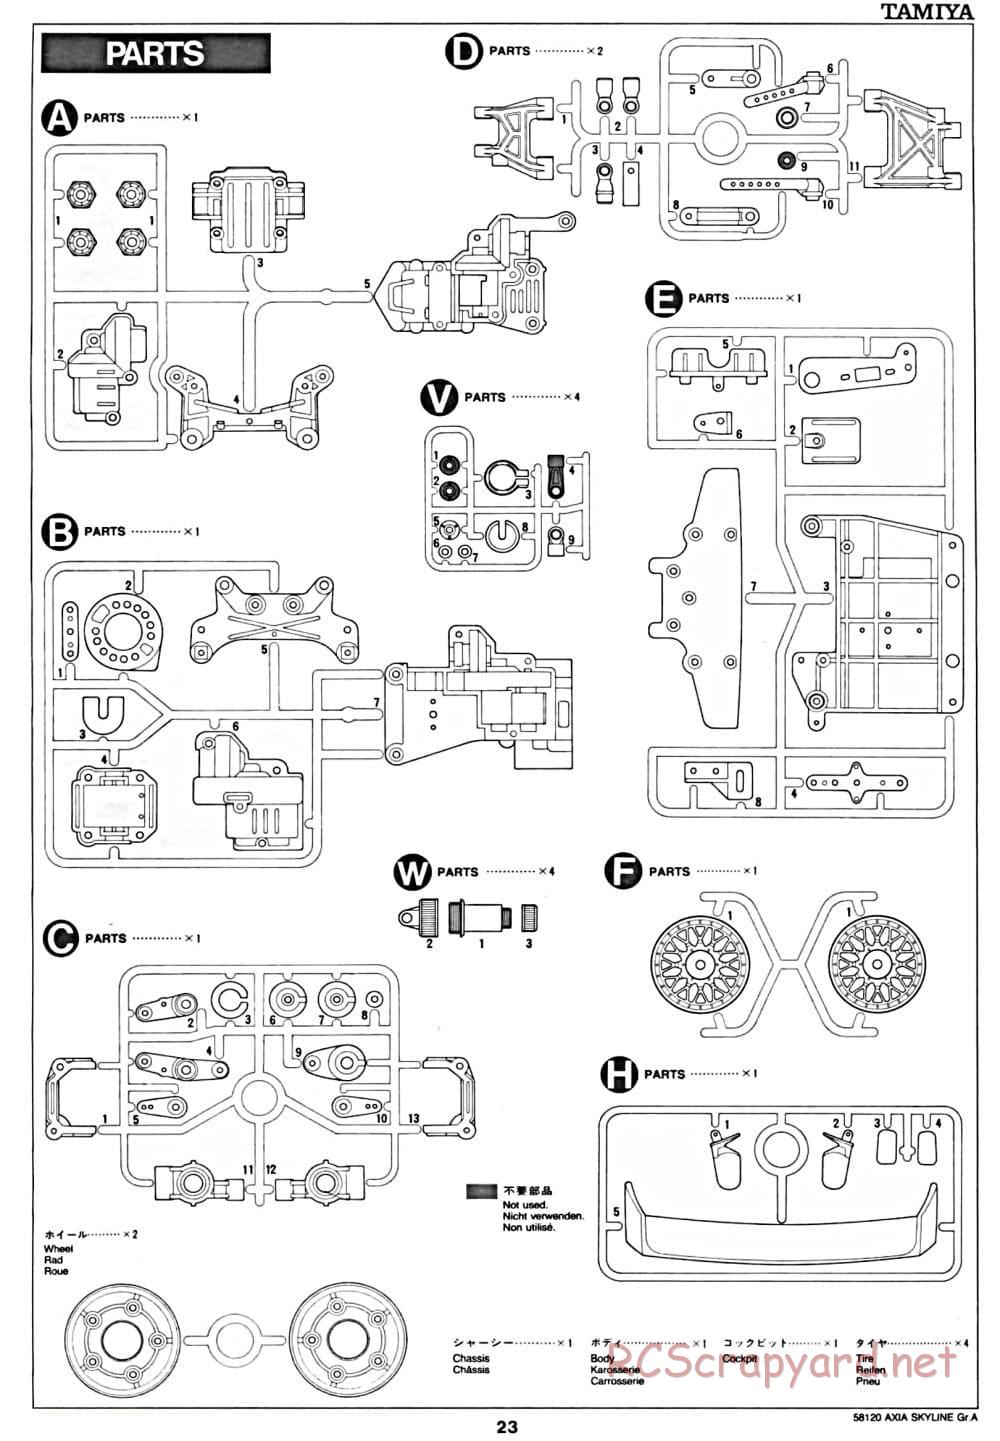 Tamiya - Axia Skyline GT-R Gr.A - TA-01 Chassis - Manual - Page 24